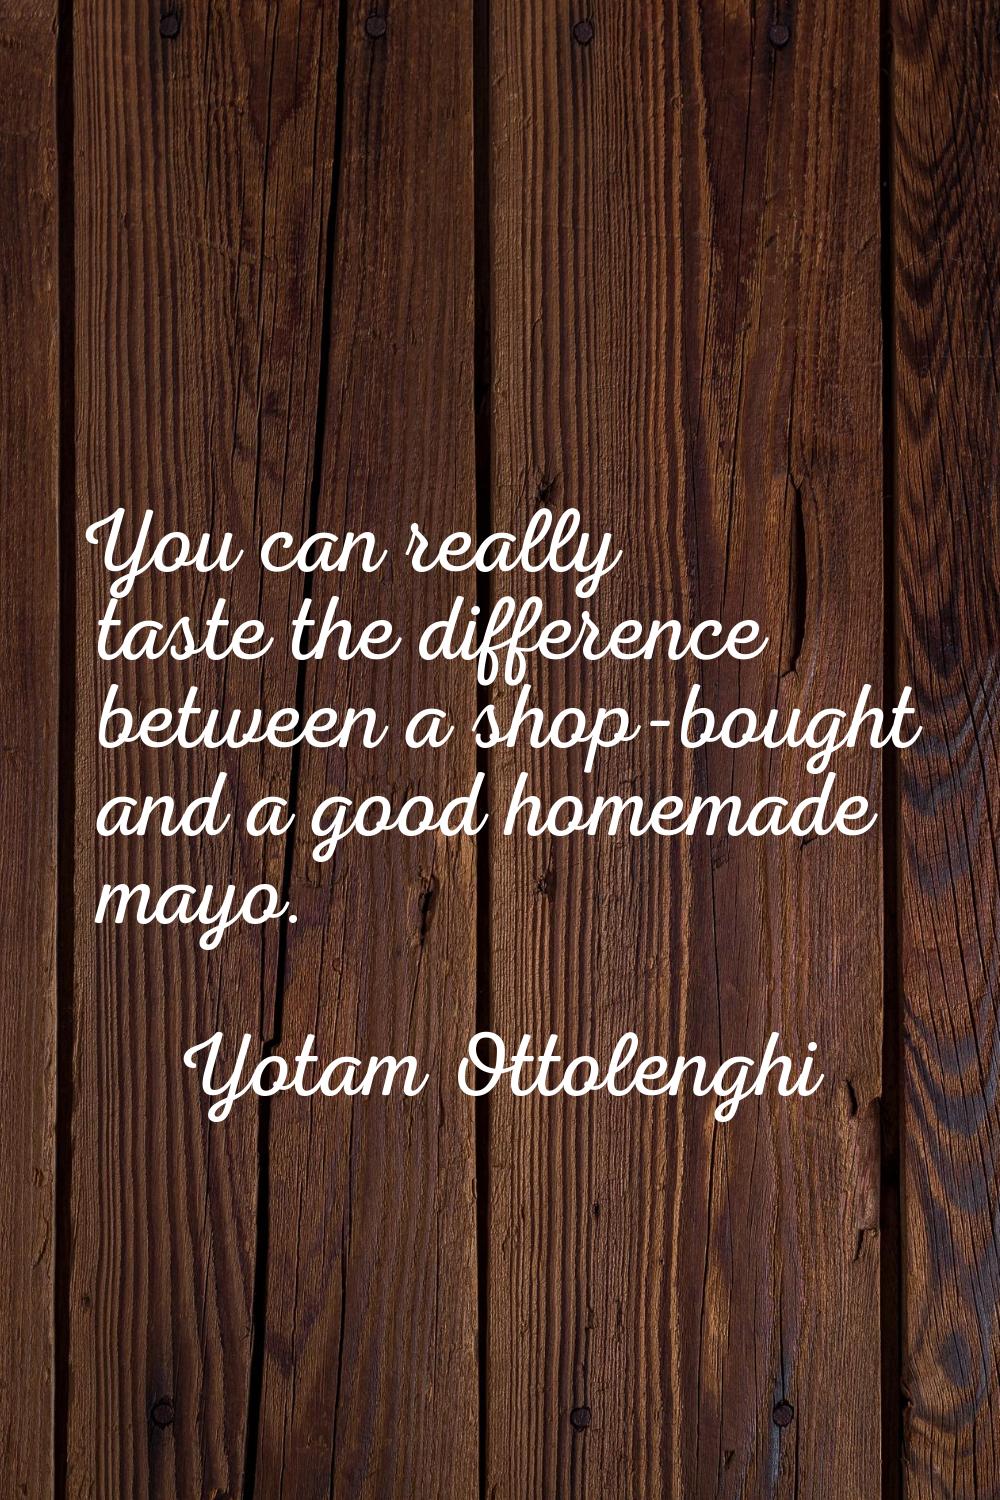 You can really taste the difference between a shop-bought and a good homemade mayo.